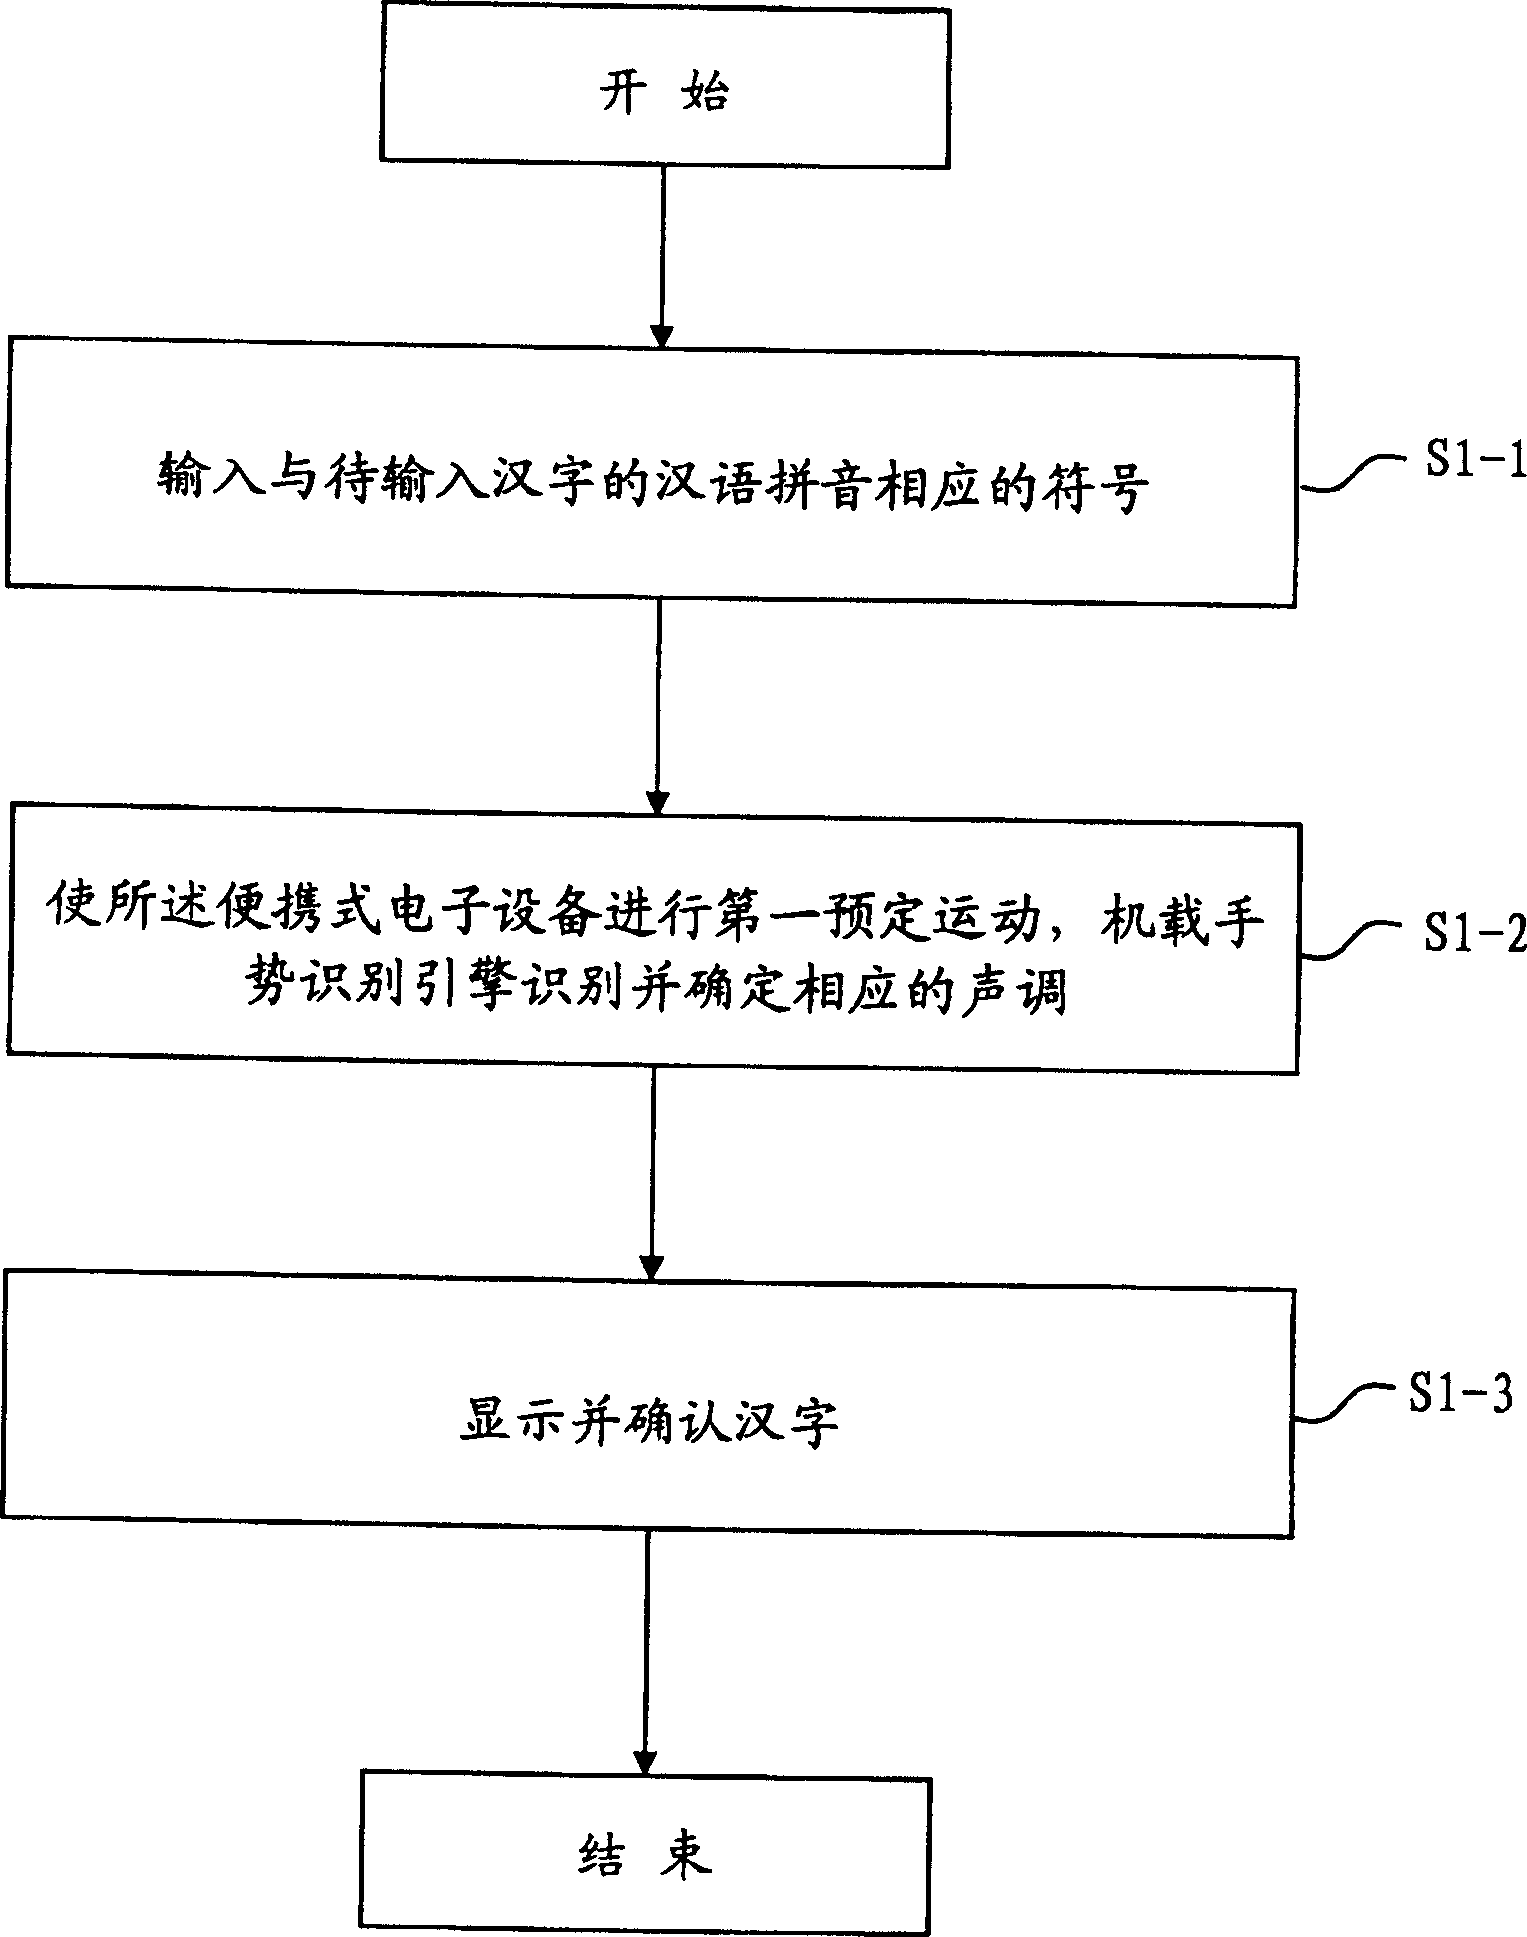 Chinese character inputting method and device with hand gesture